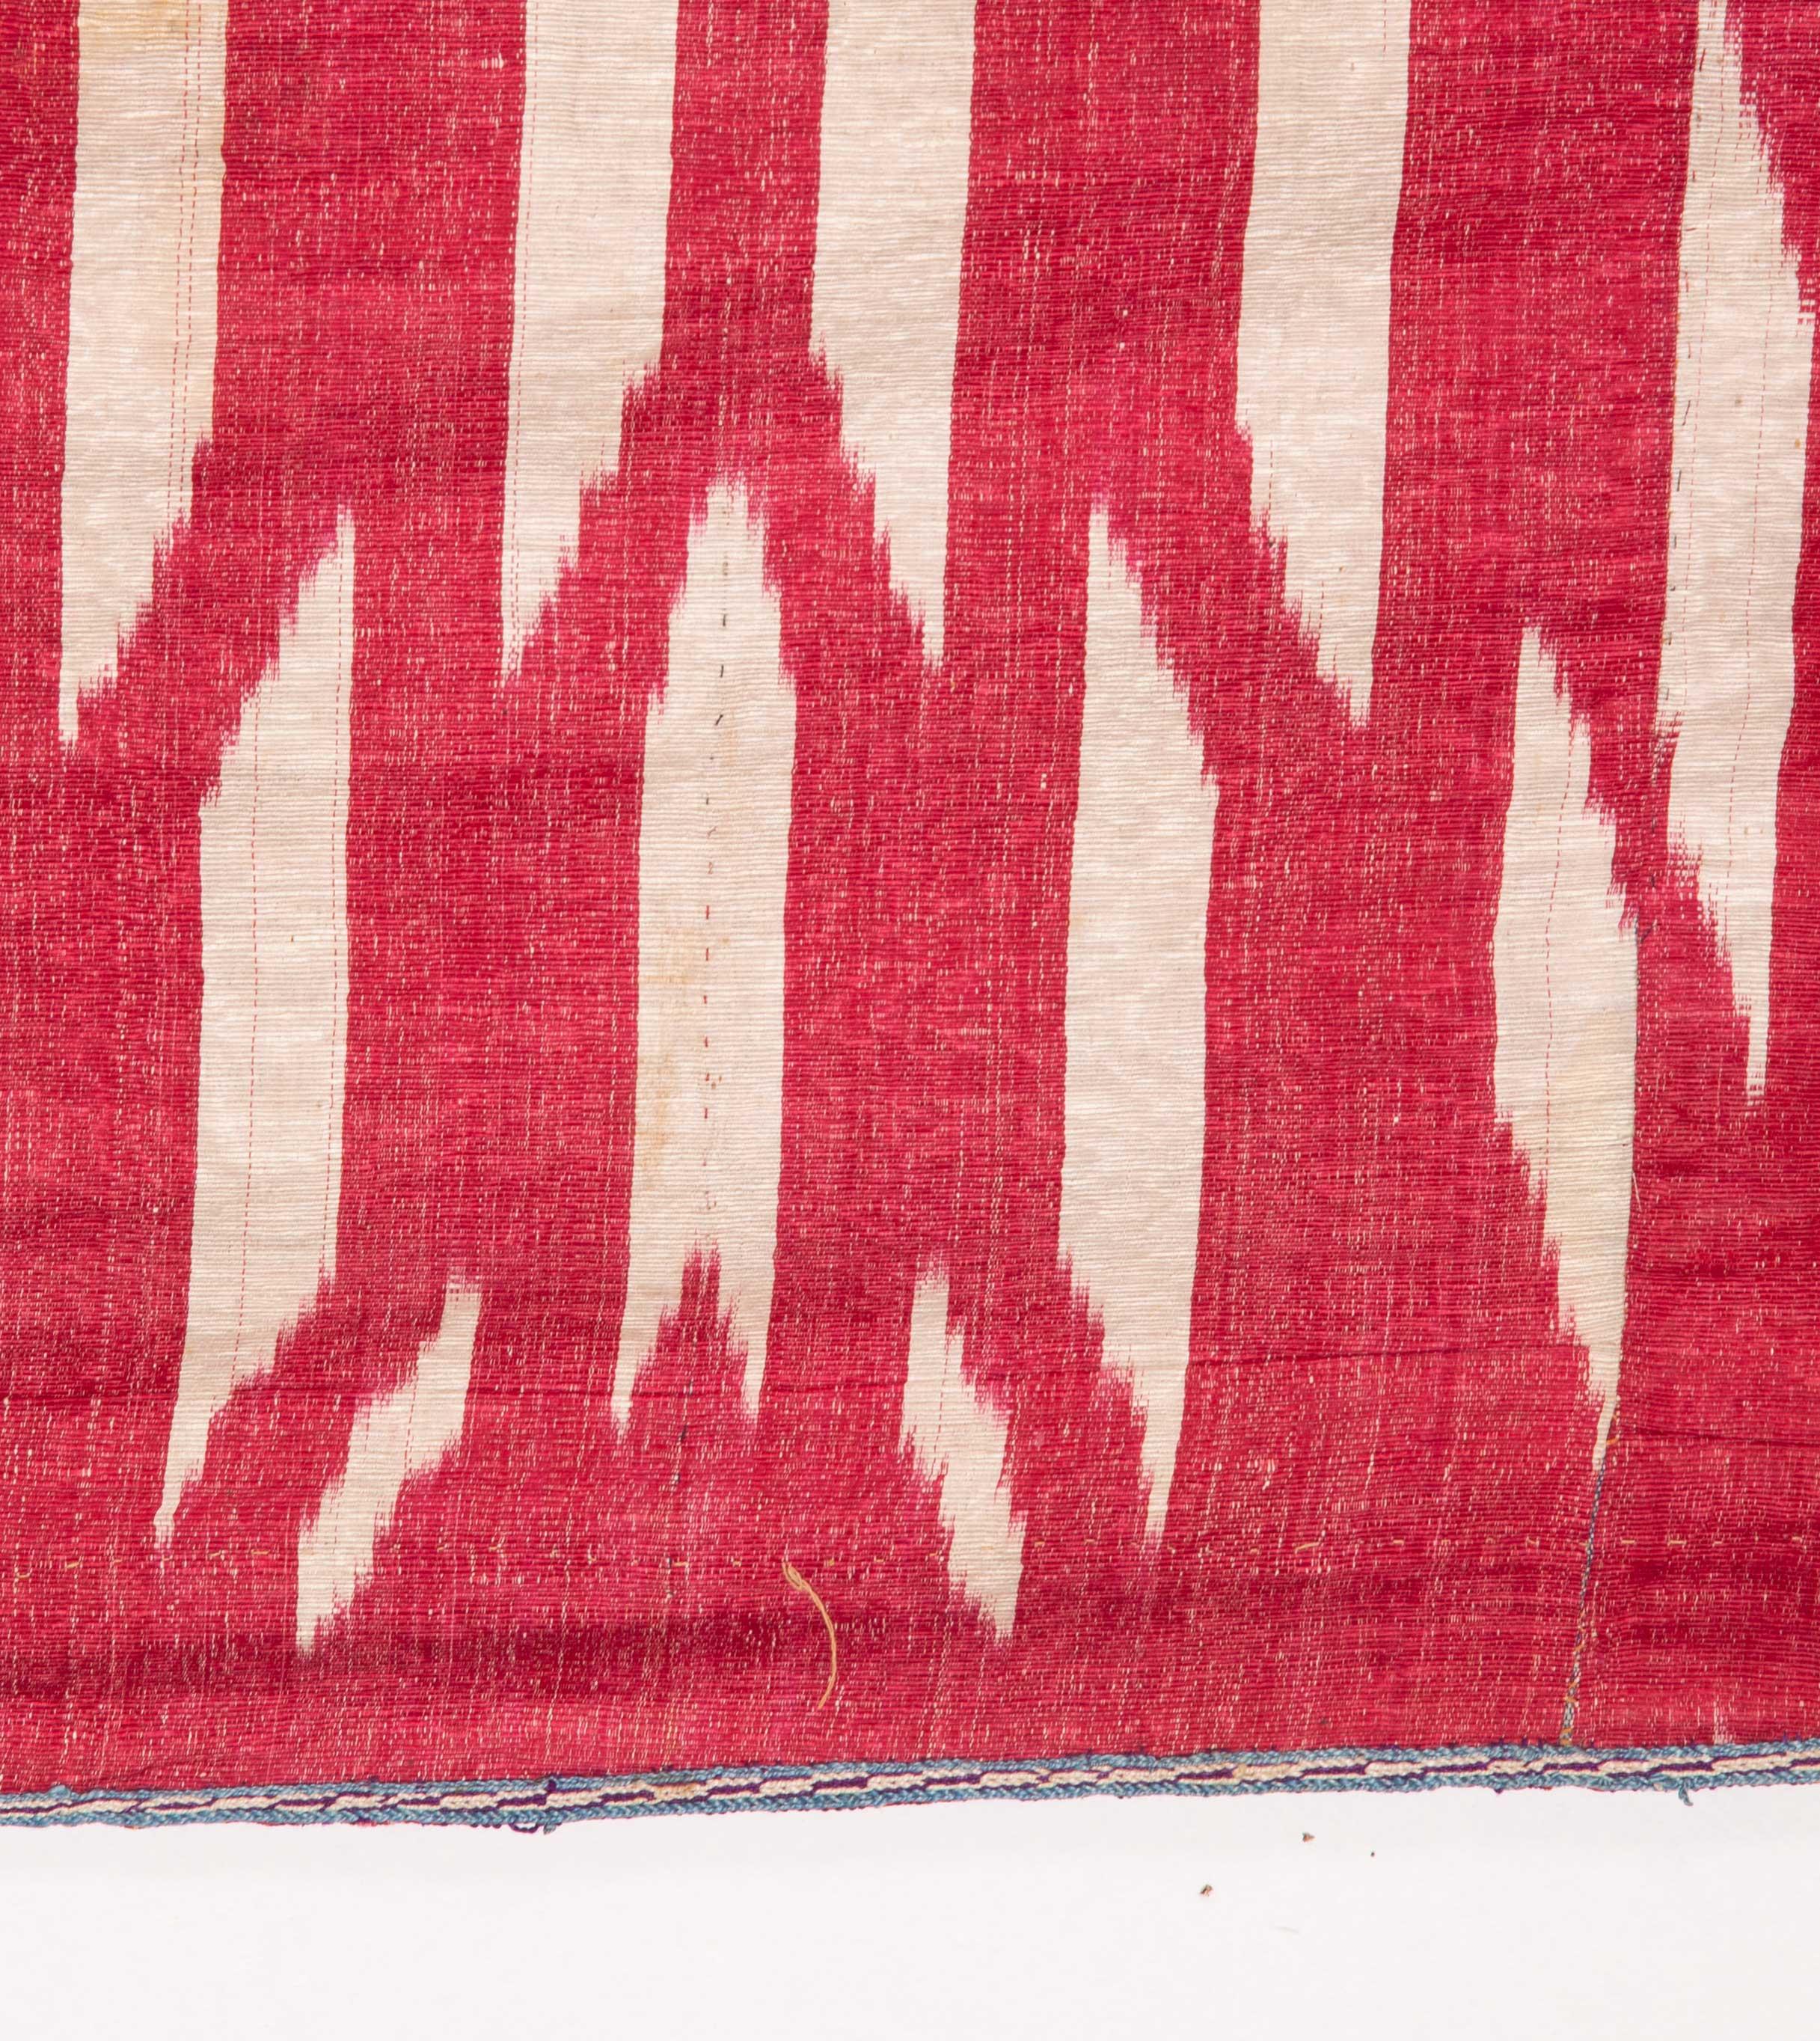 19th Century Antique Ikat Wall Hanging from Uzbekistan, Central Asia, 1870s-1880s